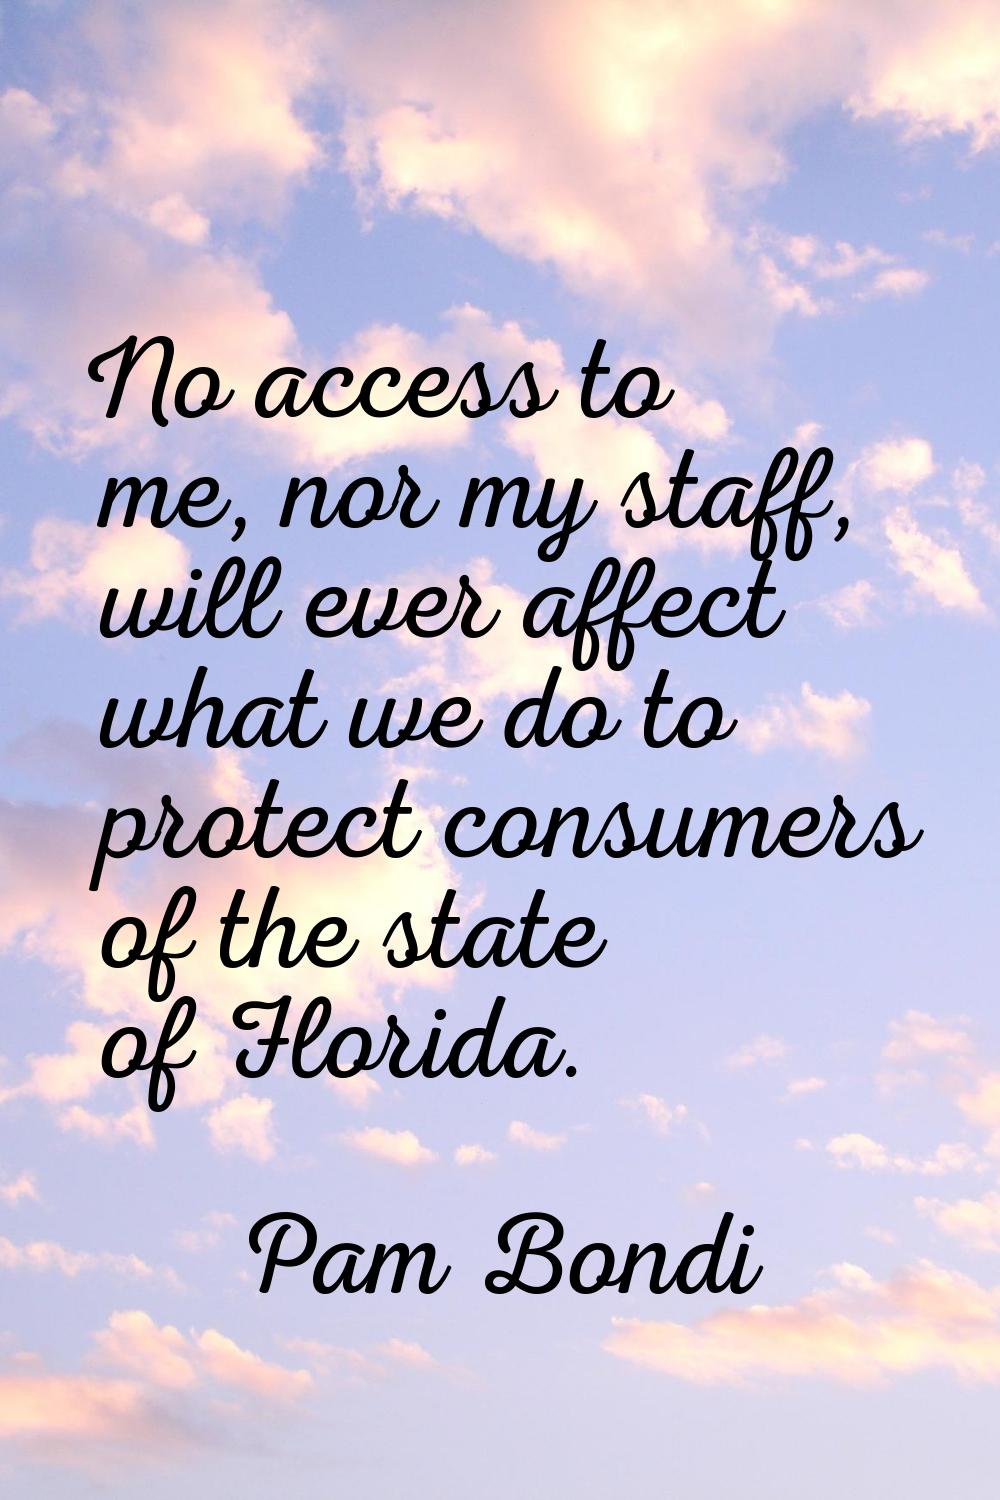 No access to me, nor my staff, will ever affect what we do to protect consumers of the state of Flo